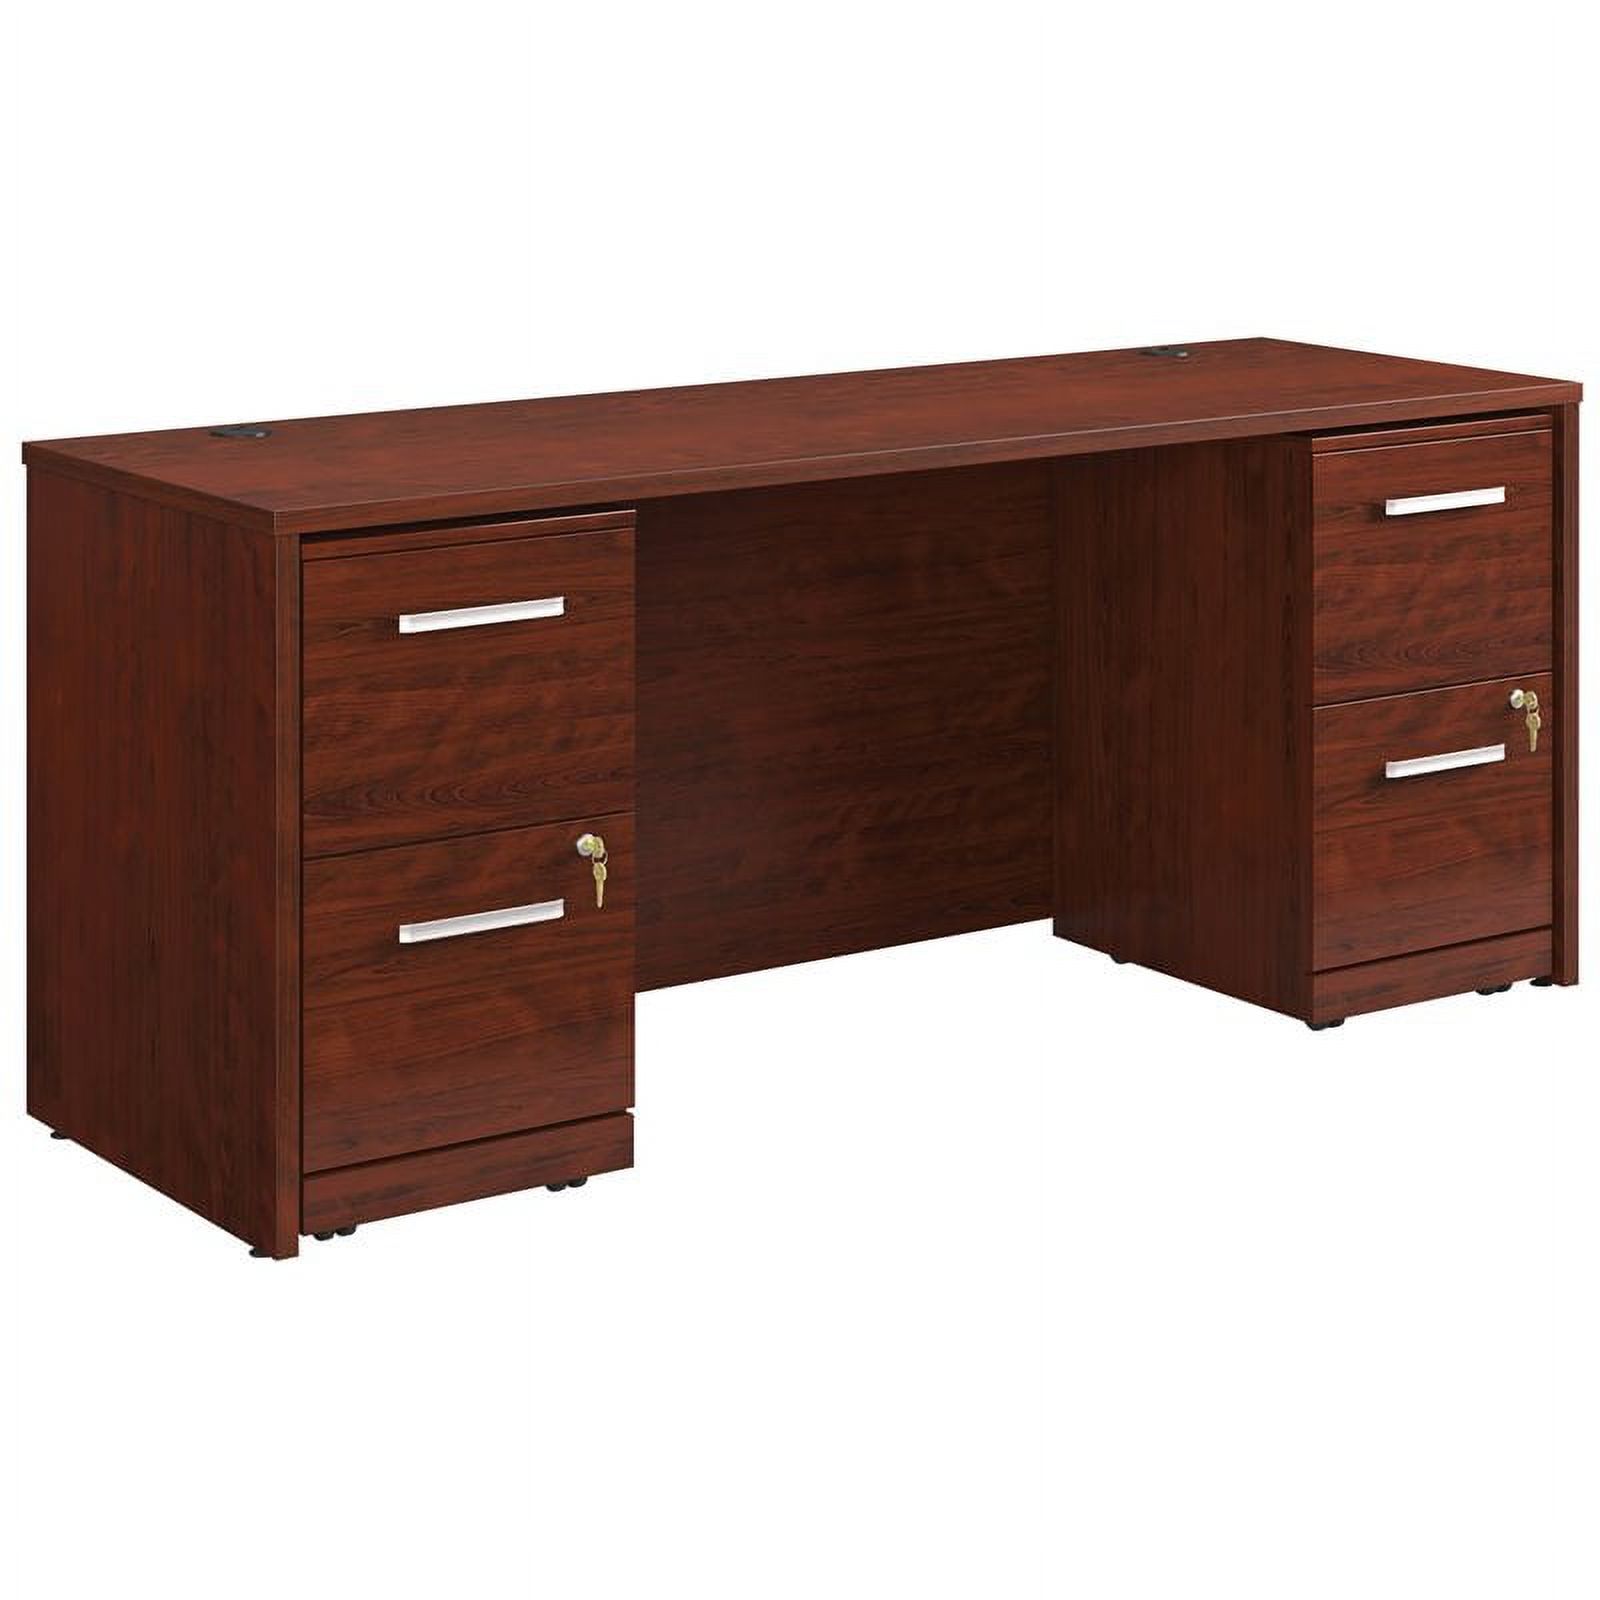 UrbanPro 72" x 24" Shell and Two 2-Drawers Mobile File Cabinet in Cherry - image 1 of 3